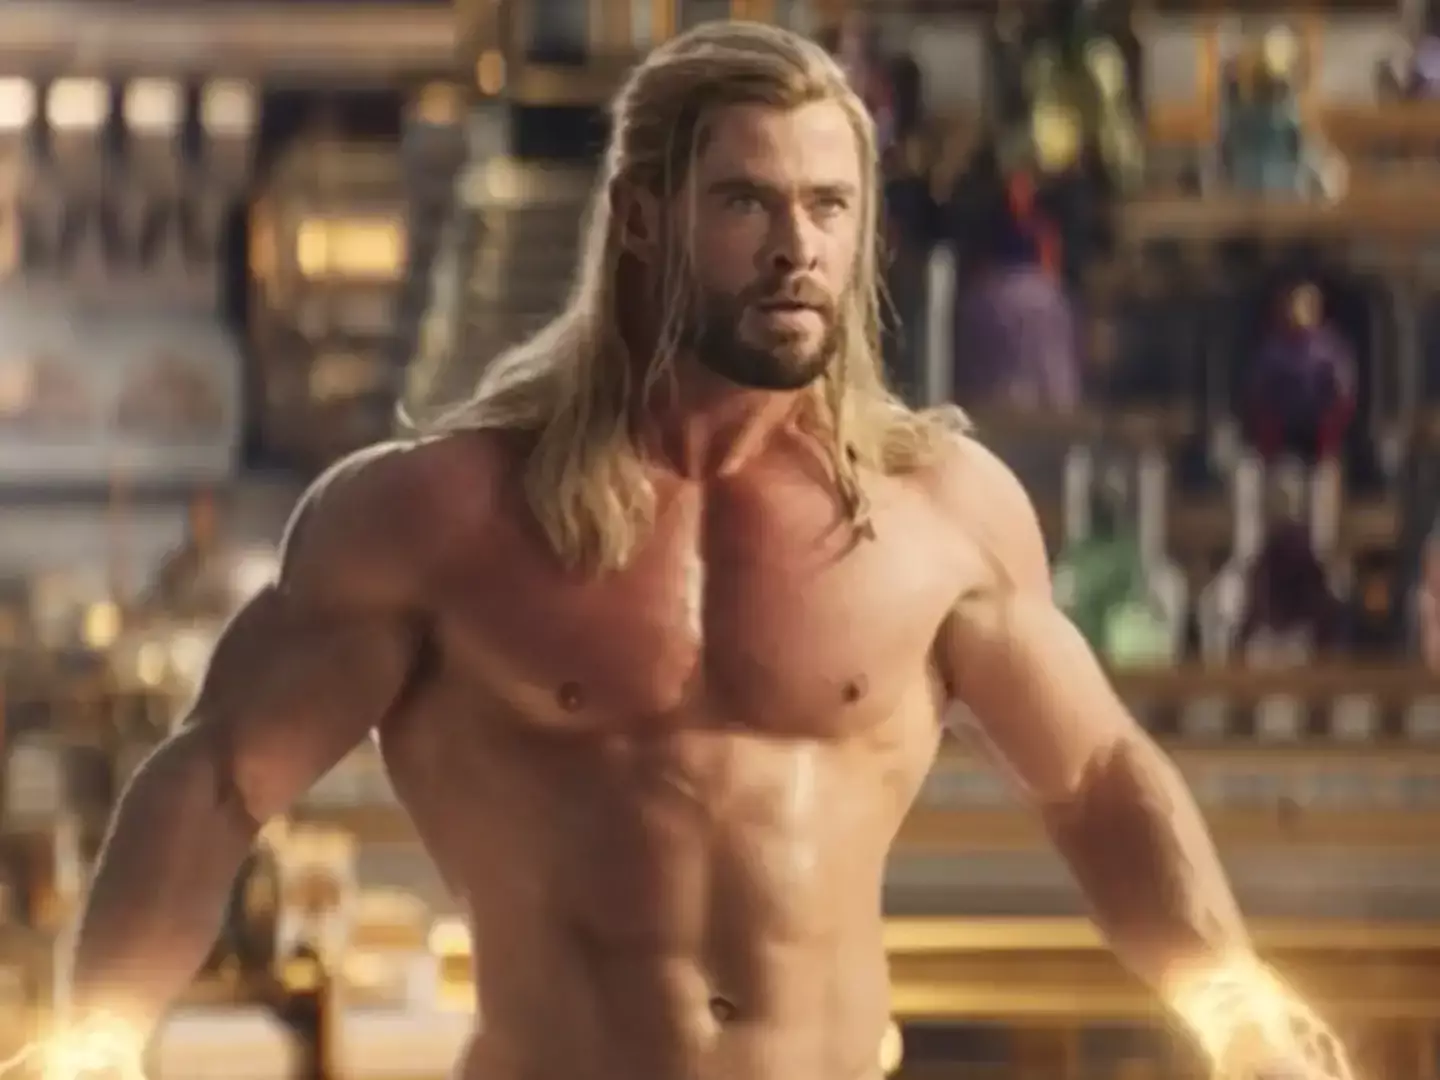 The Marvel star wanted to get even bigger for his latest Thor role.